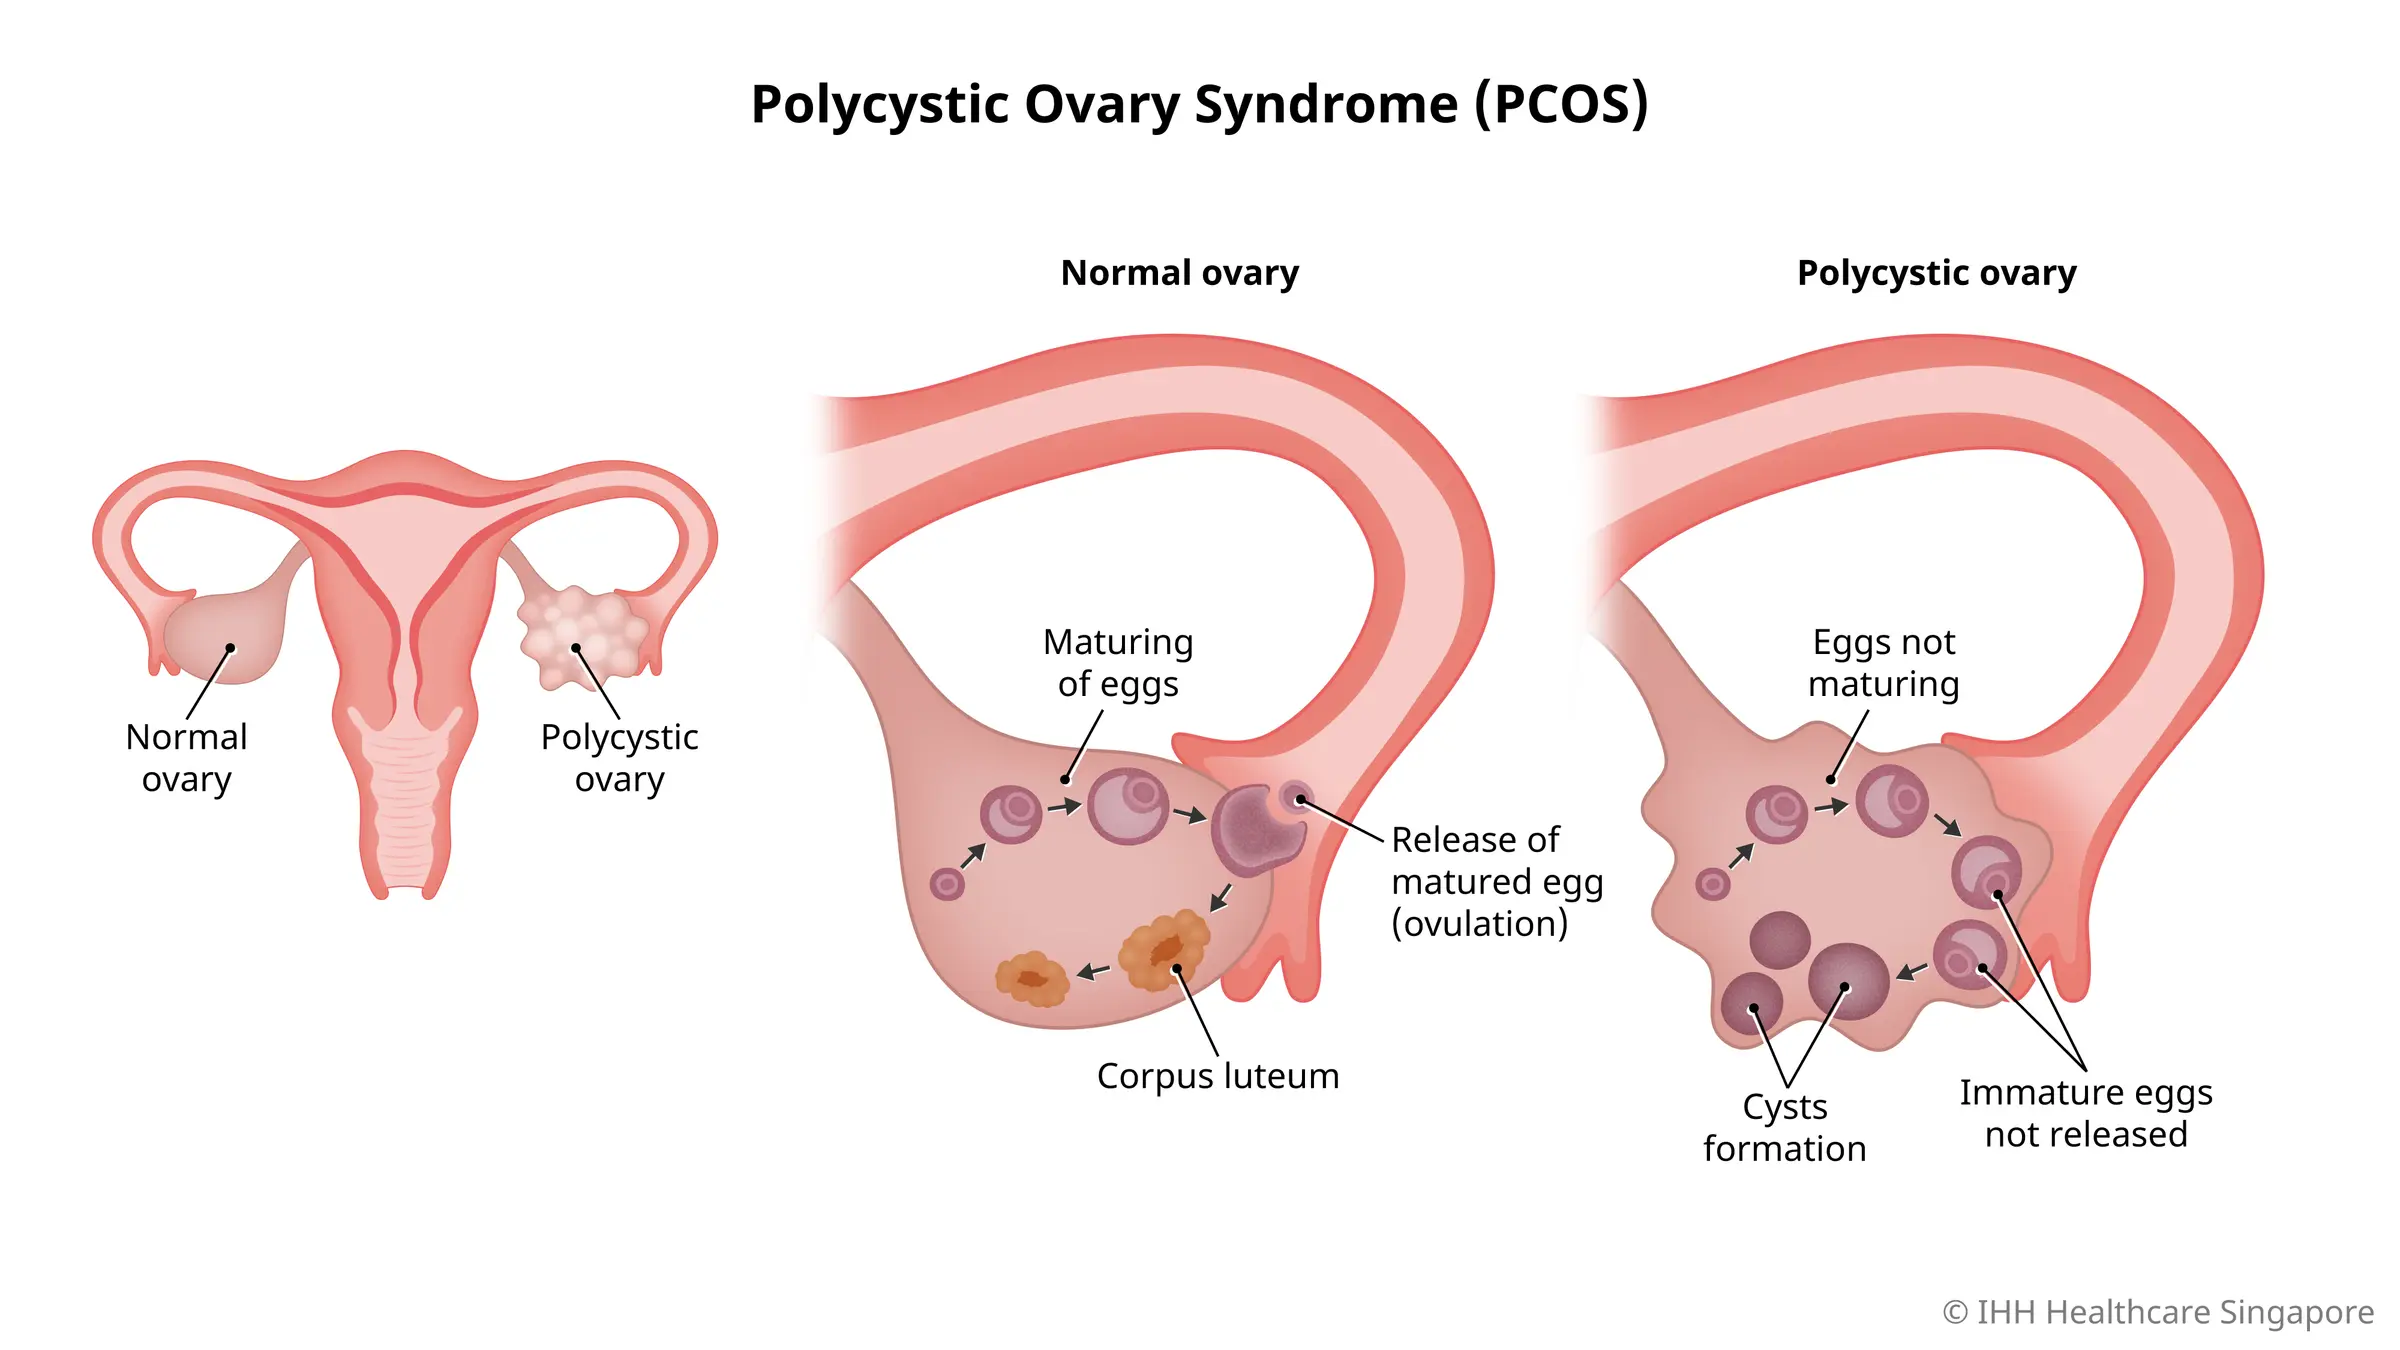 Polycystic Ovary Syndrome or PCOS is a common hormonal disorder that causes small cysts to form in women's ovaries.